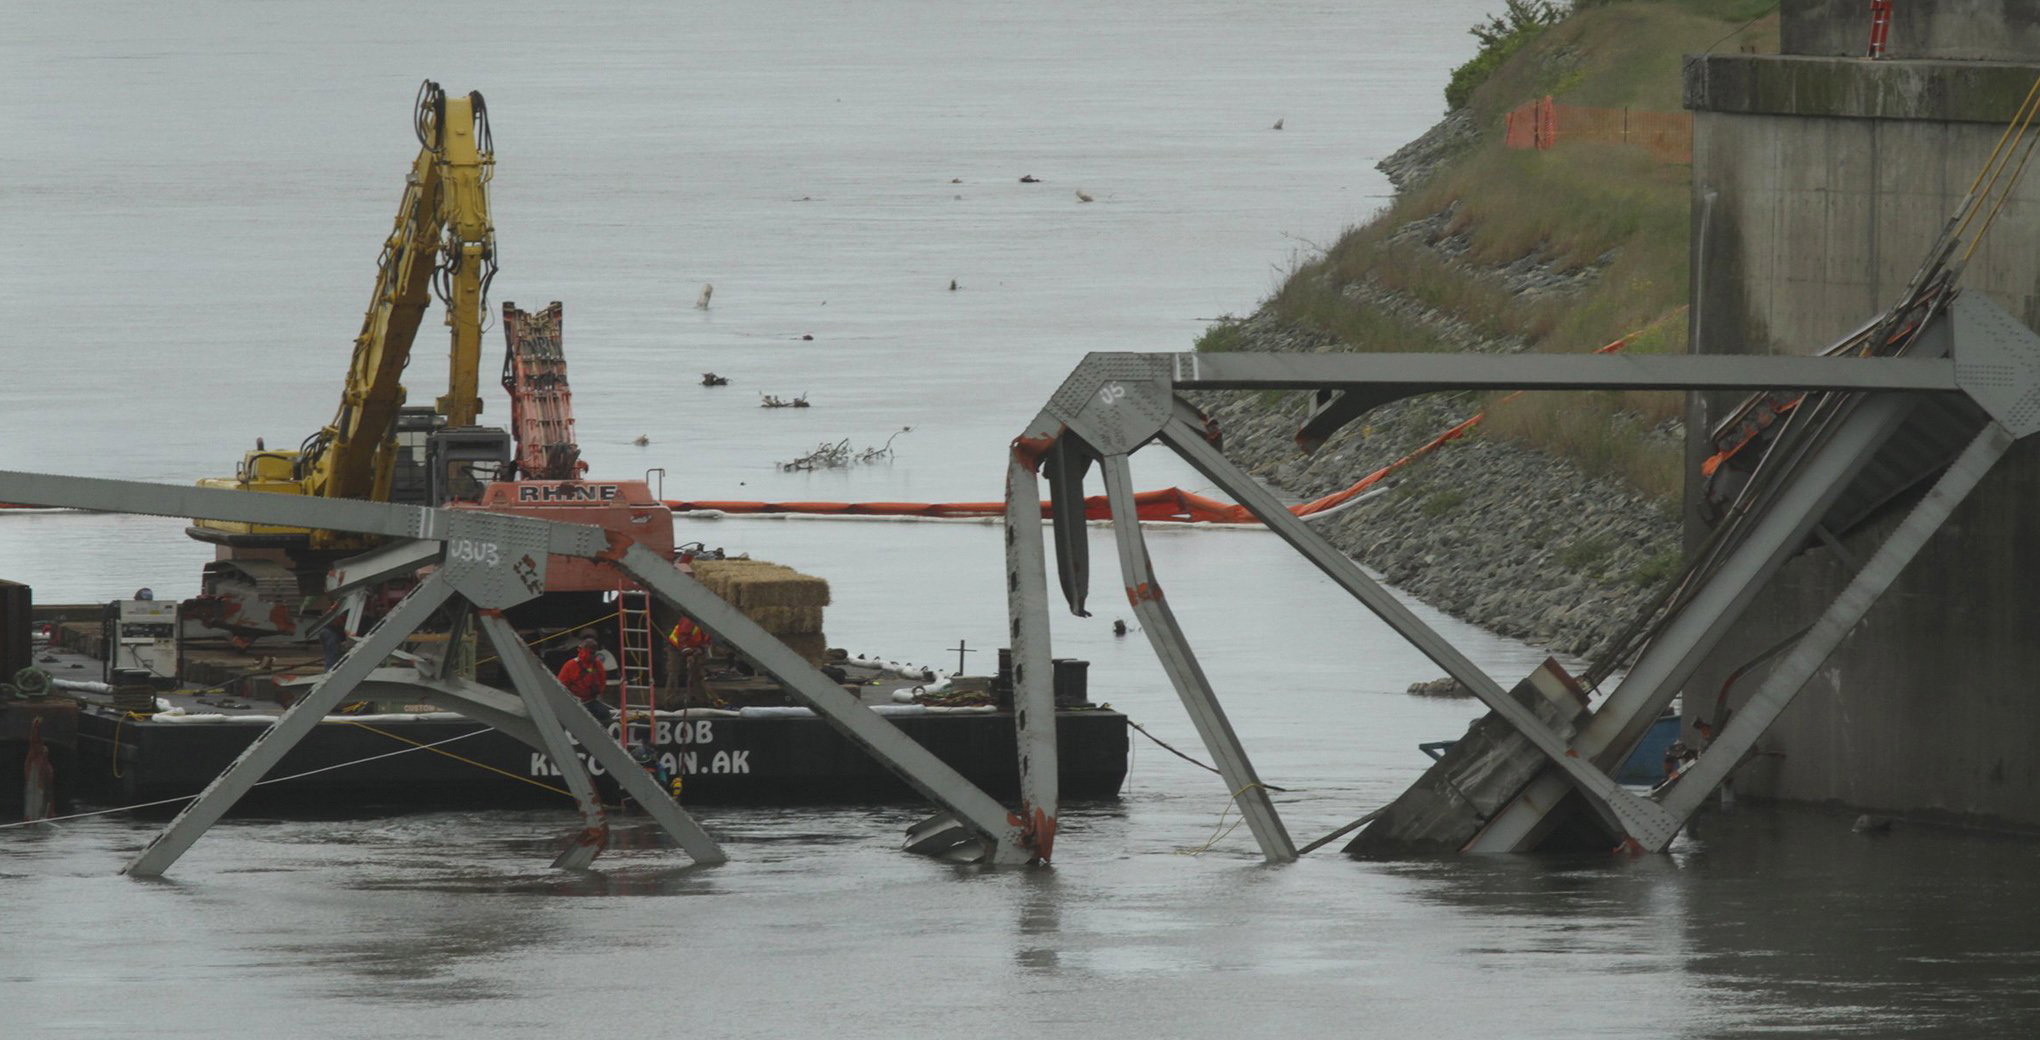 Steel beams are removed from the water in Mount Vernon on Tuesday, following the collapse of a section of the I-5 bridge over the Skagit River last week.